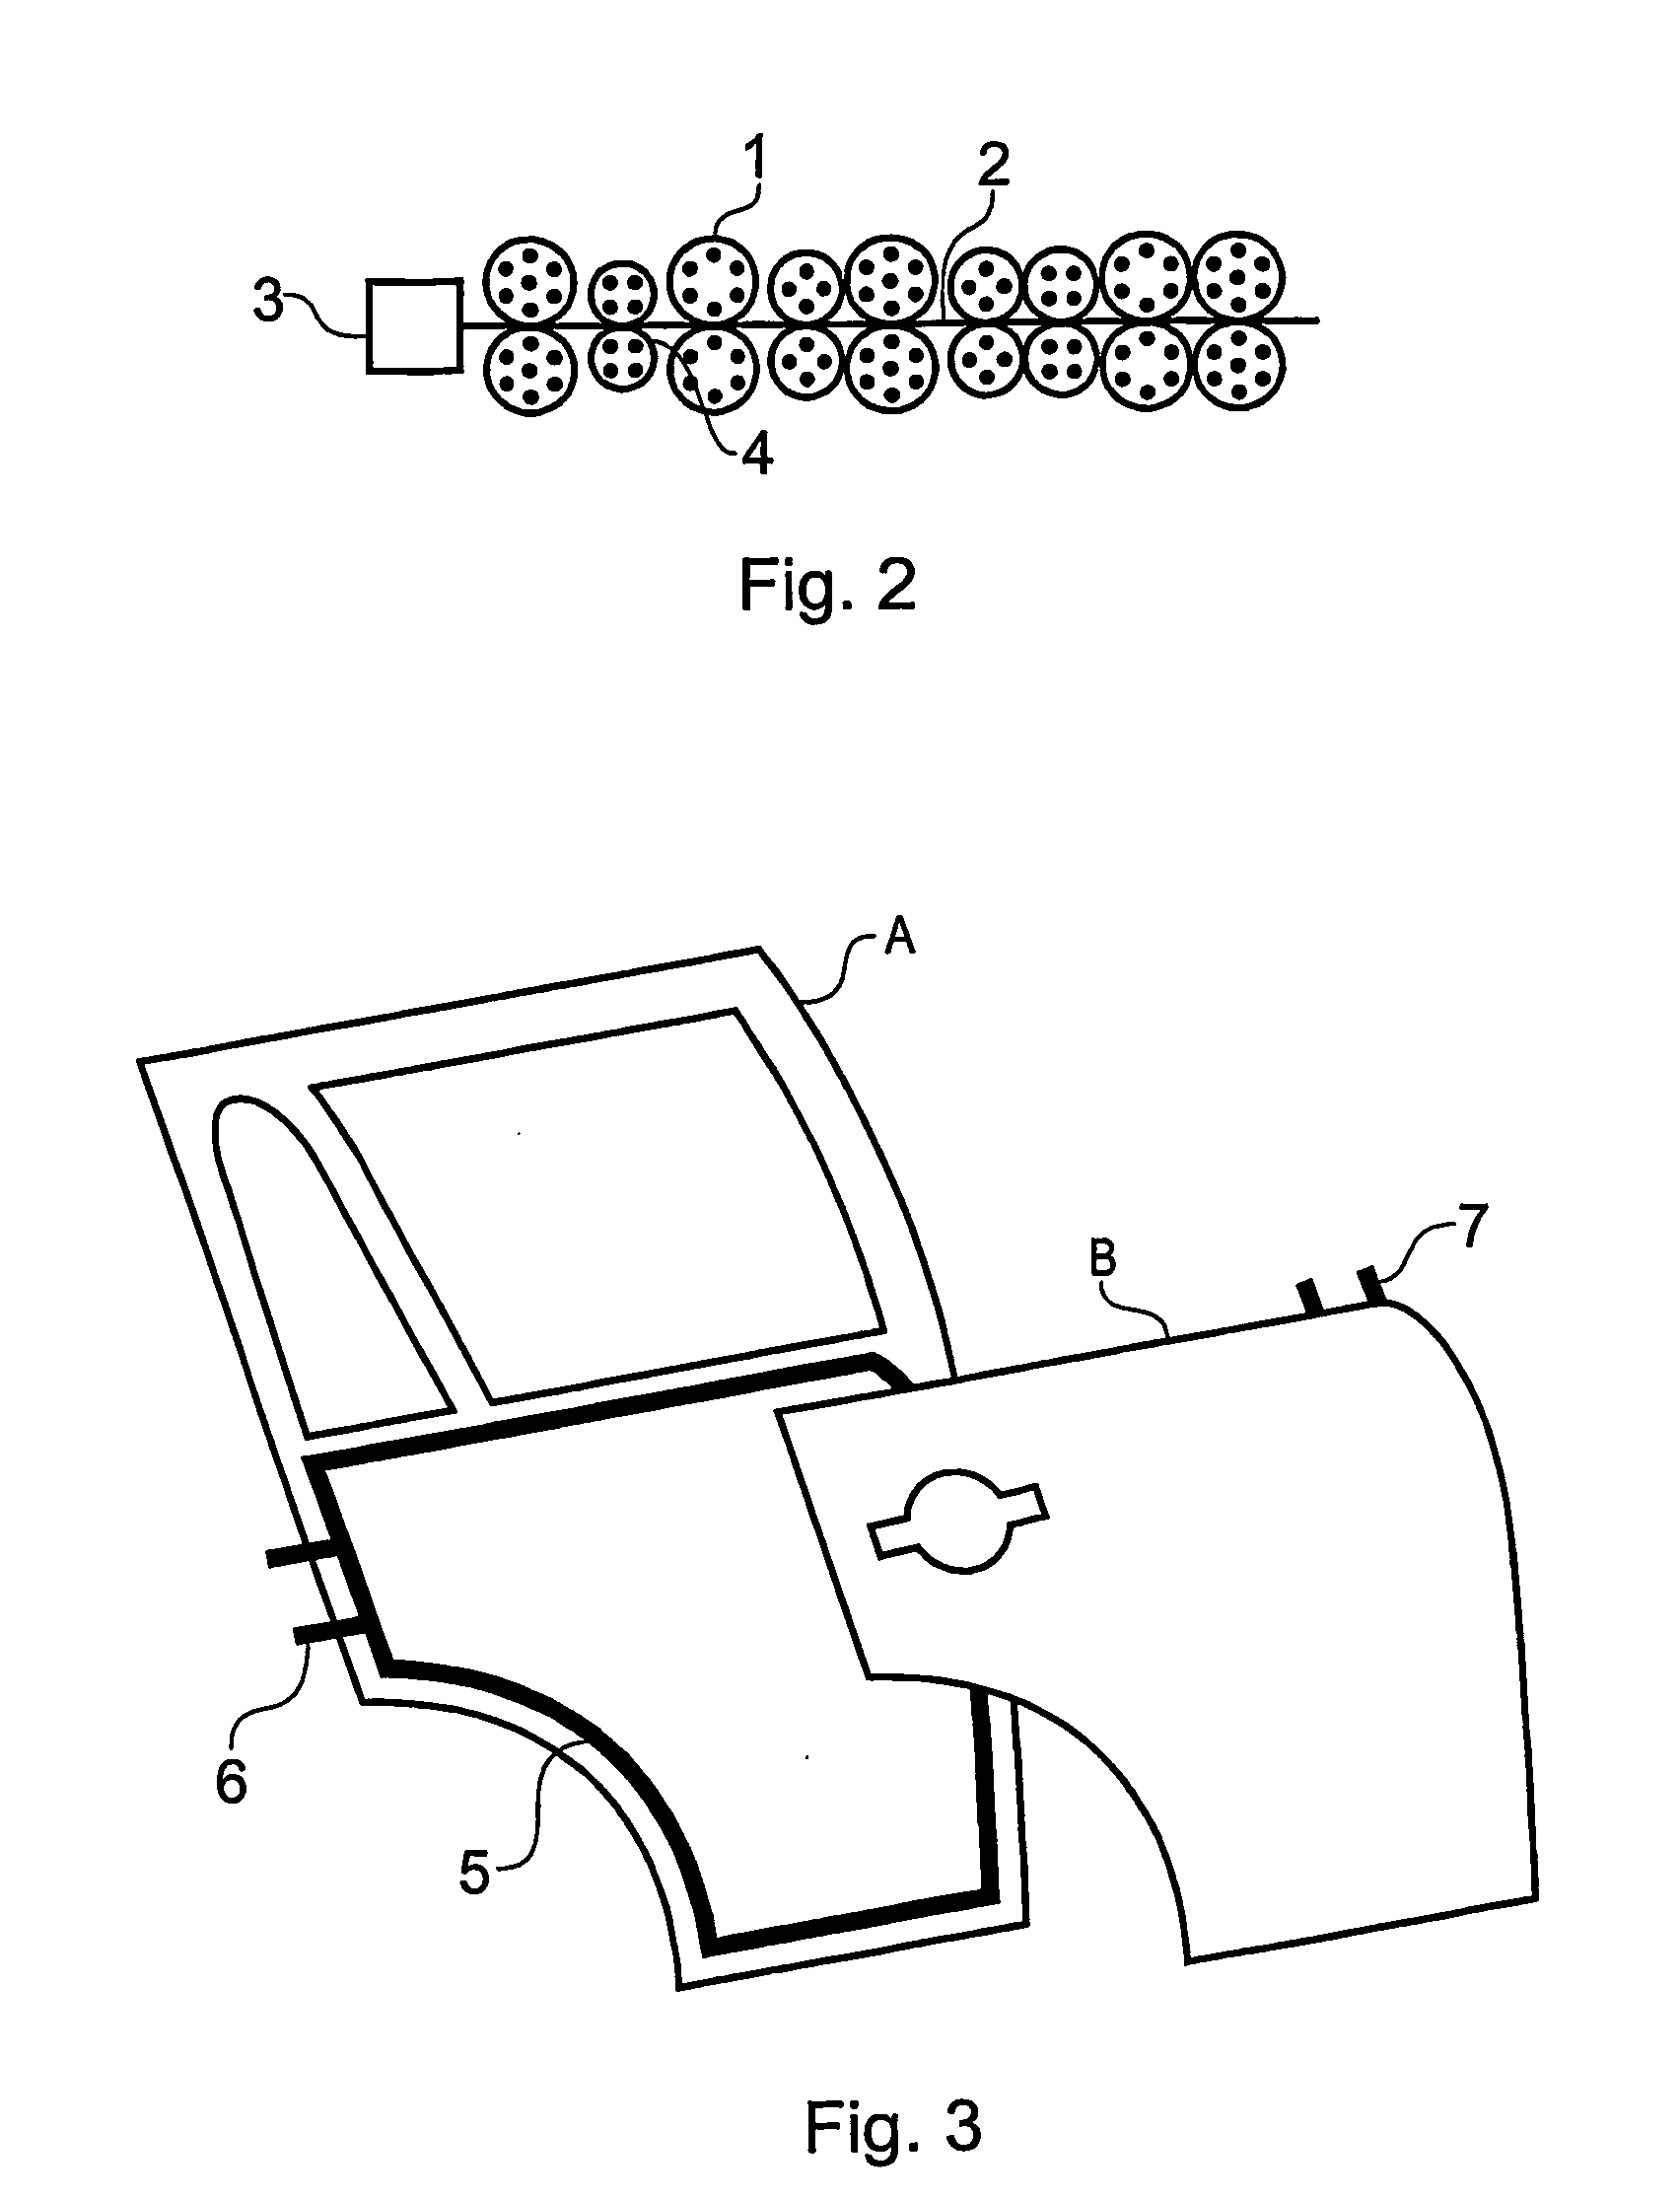 Method and apparatus for bonding and debonding adhesive interface surfaces